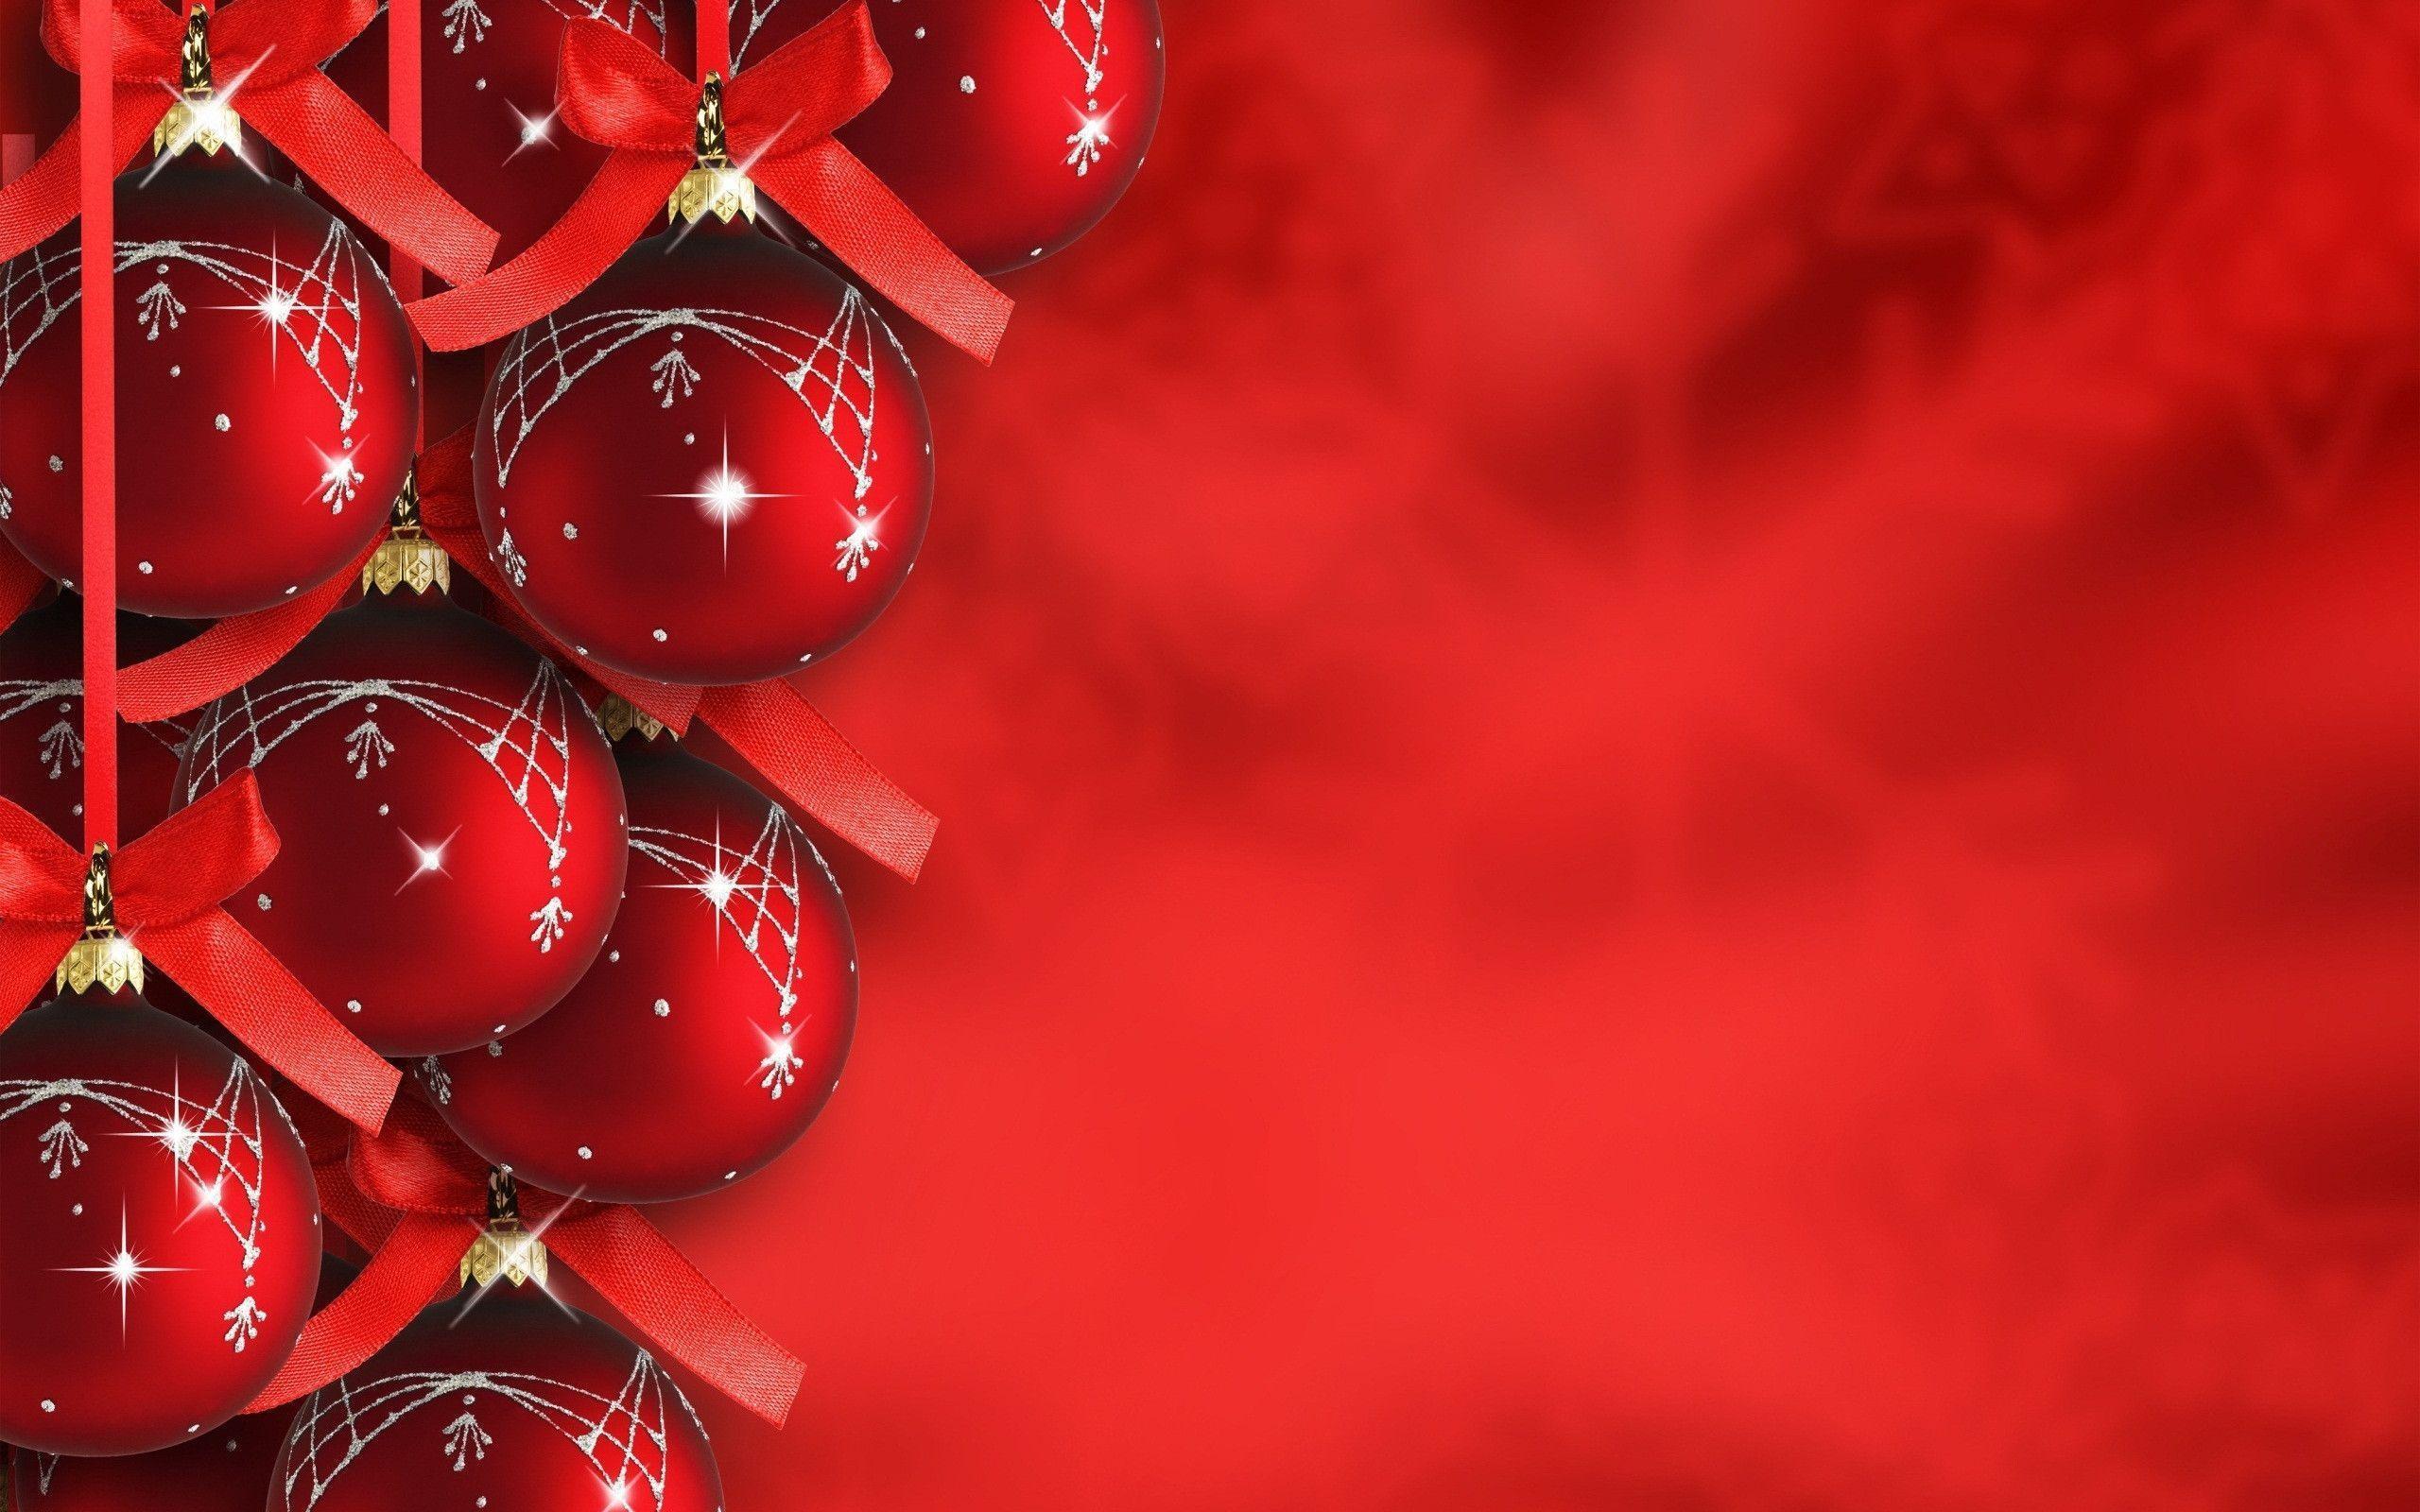 Xmas Stuff For > Red Christmas Decorations Wallpaper